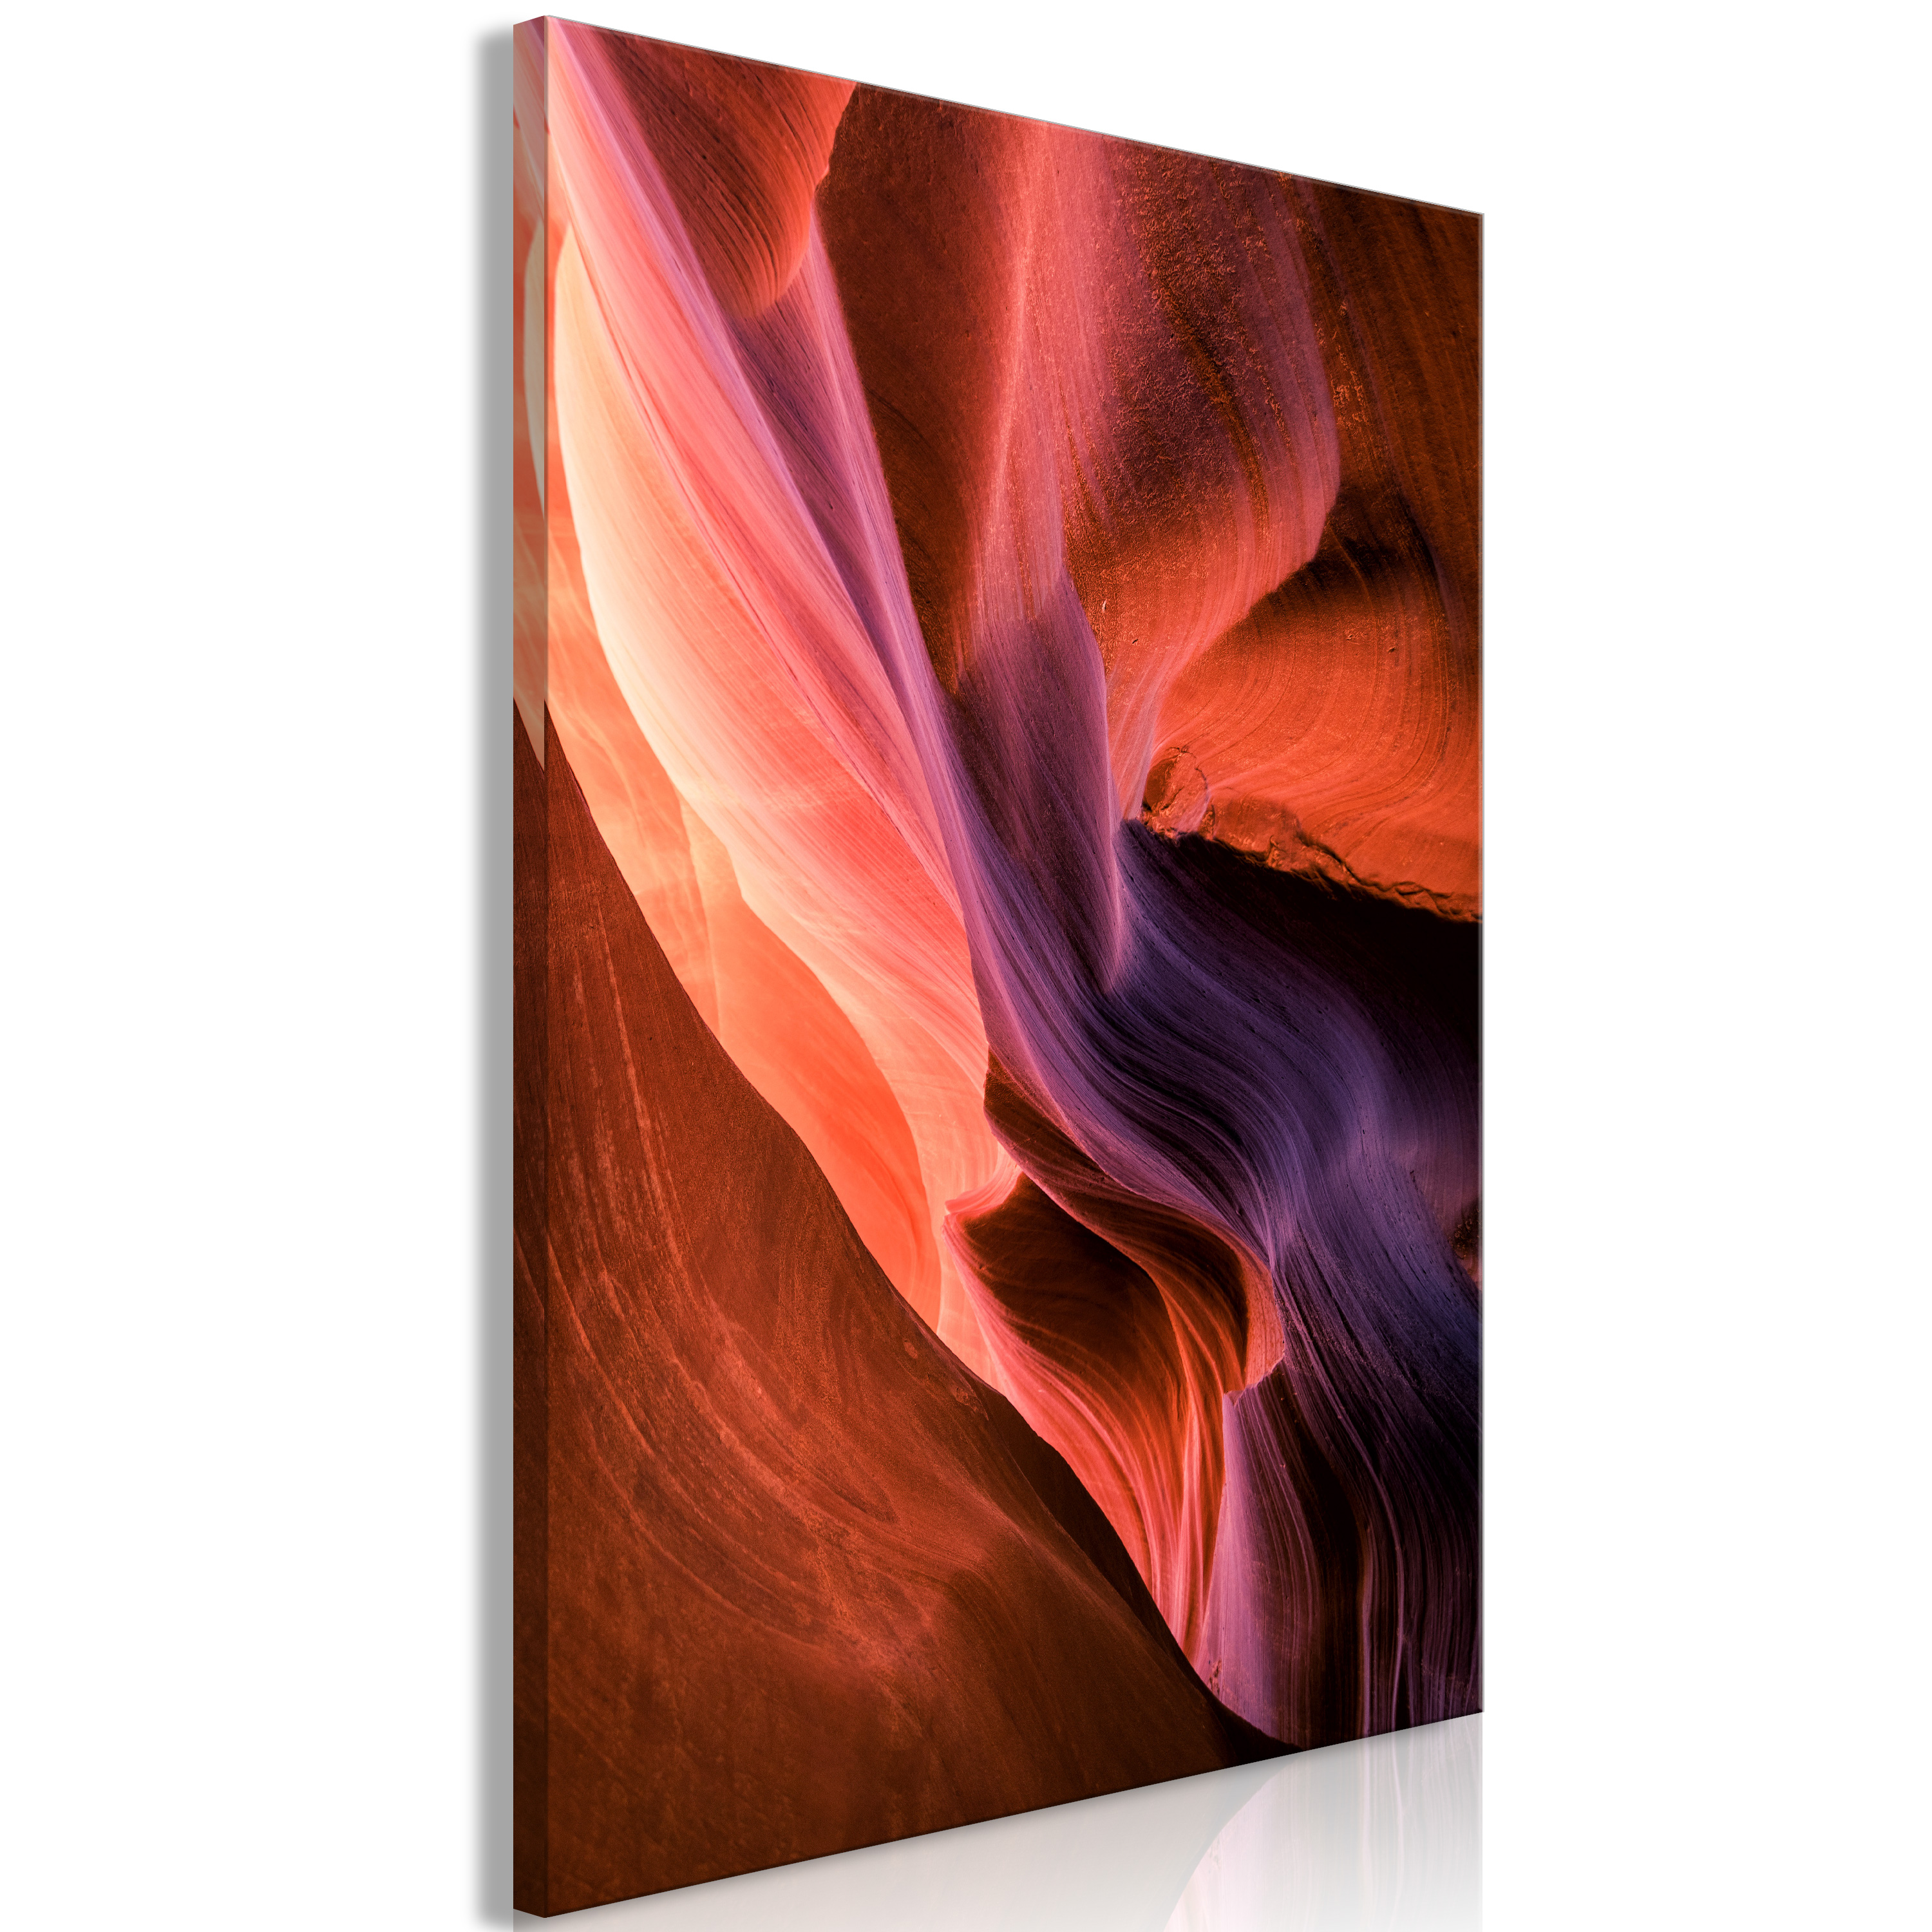 Canvas Print - Inside the Canyon (1 Part) Vertical - 60x90